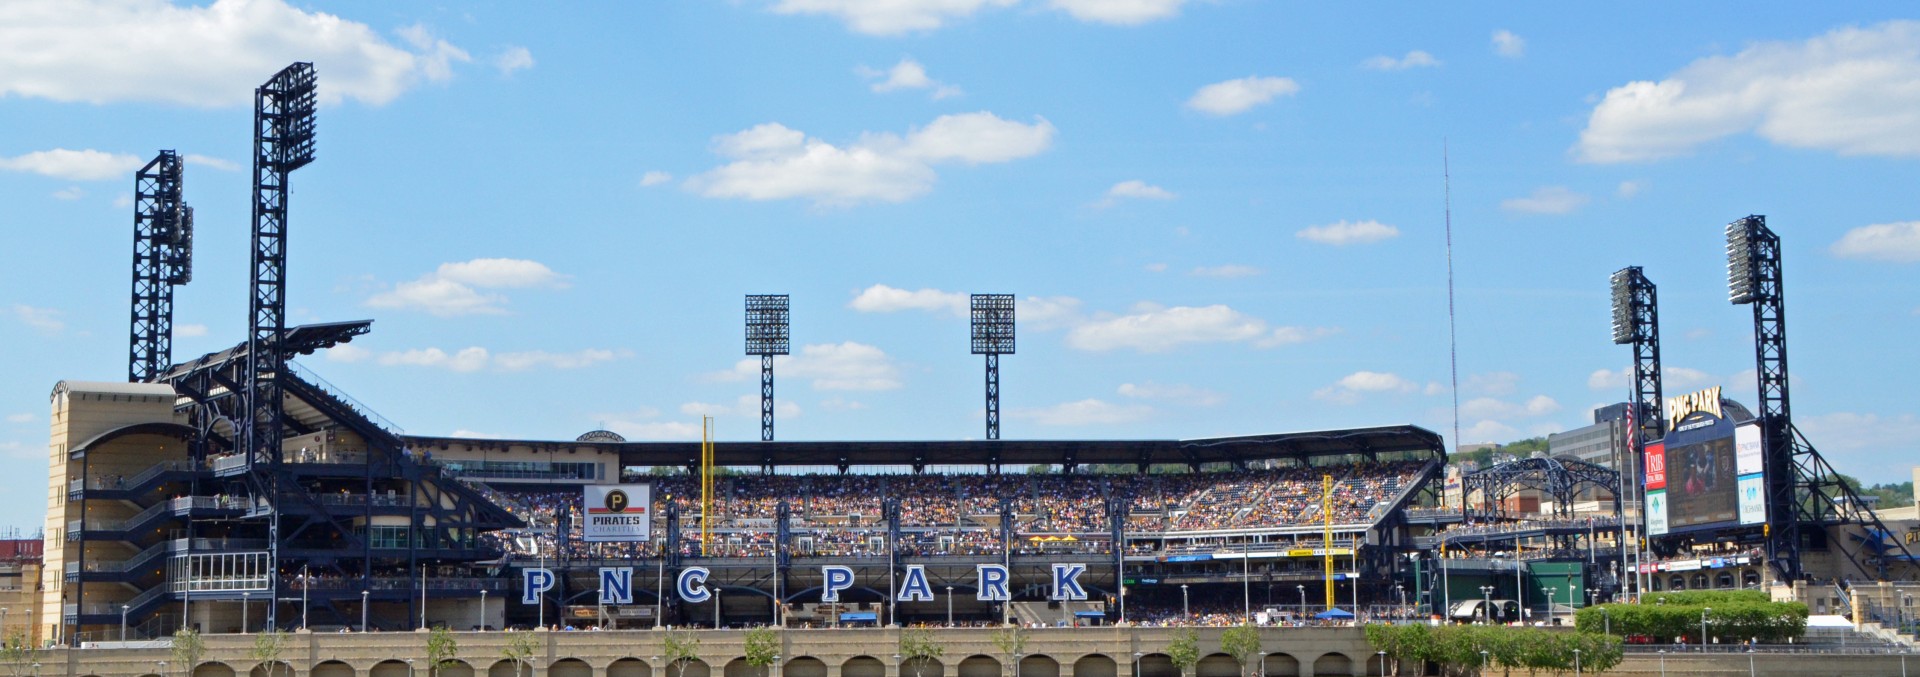 Full House at PNC Park, Pittsburgh